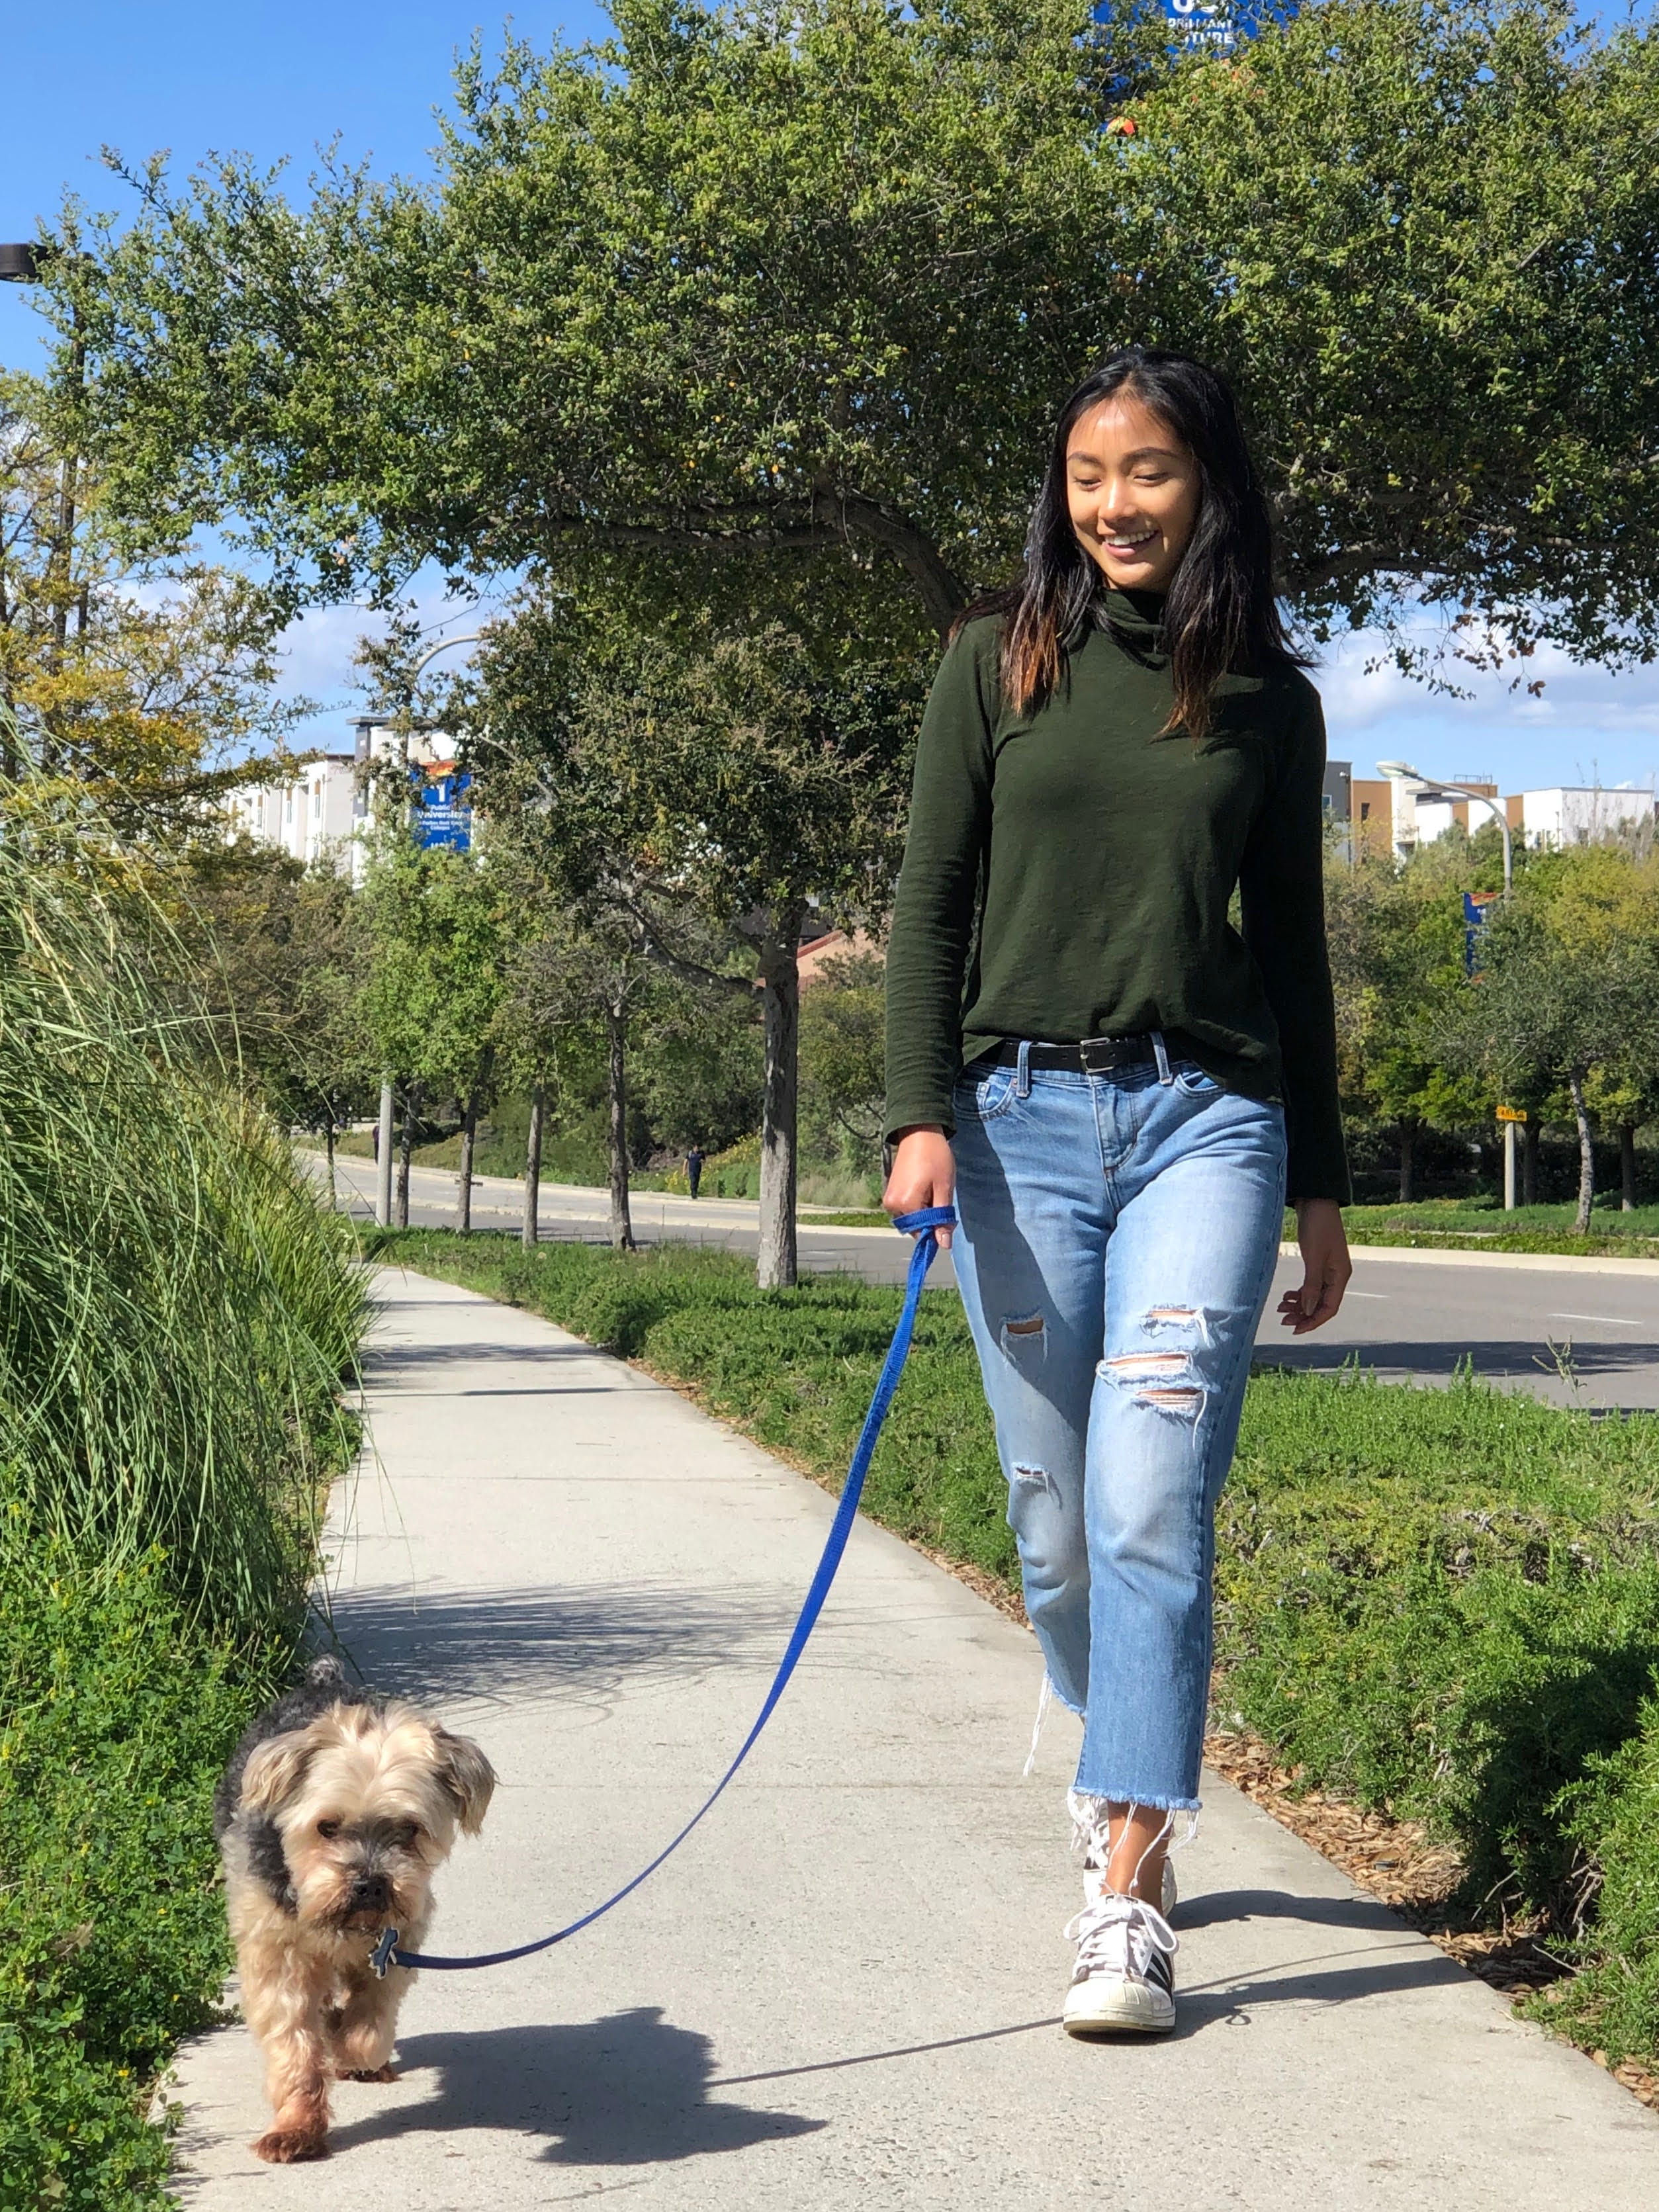 First-year medical student Emily Tom – a member of the volunteer coalition organized by first-year medical student Austin Franklin – walks a UCI Medical Center staff member’s dog.